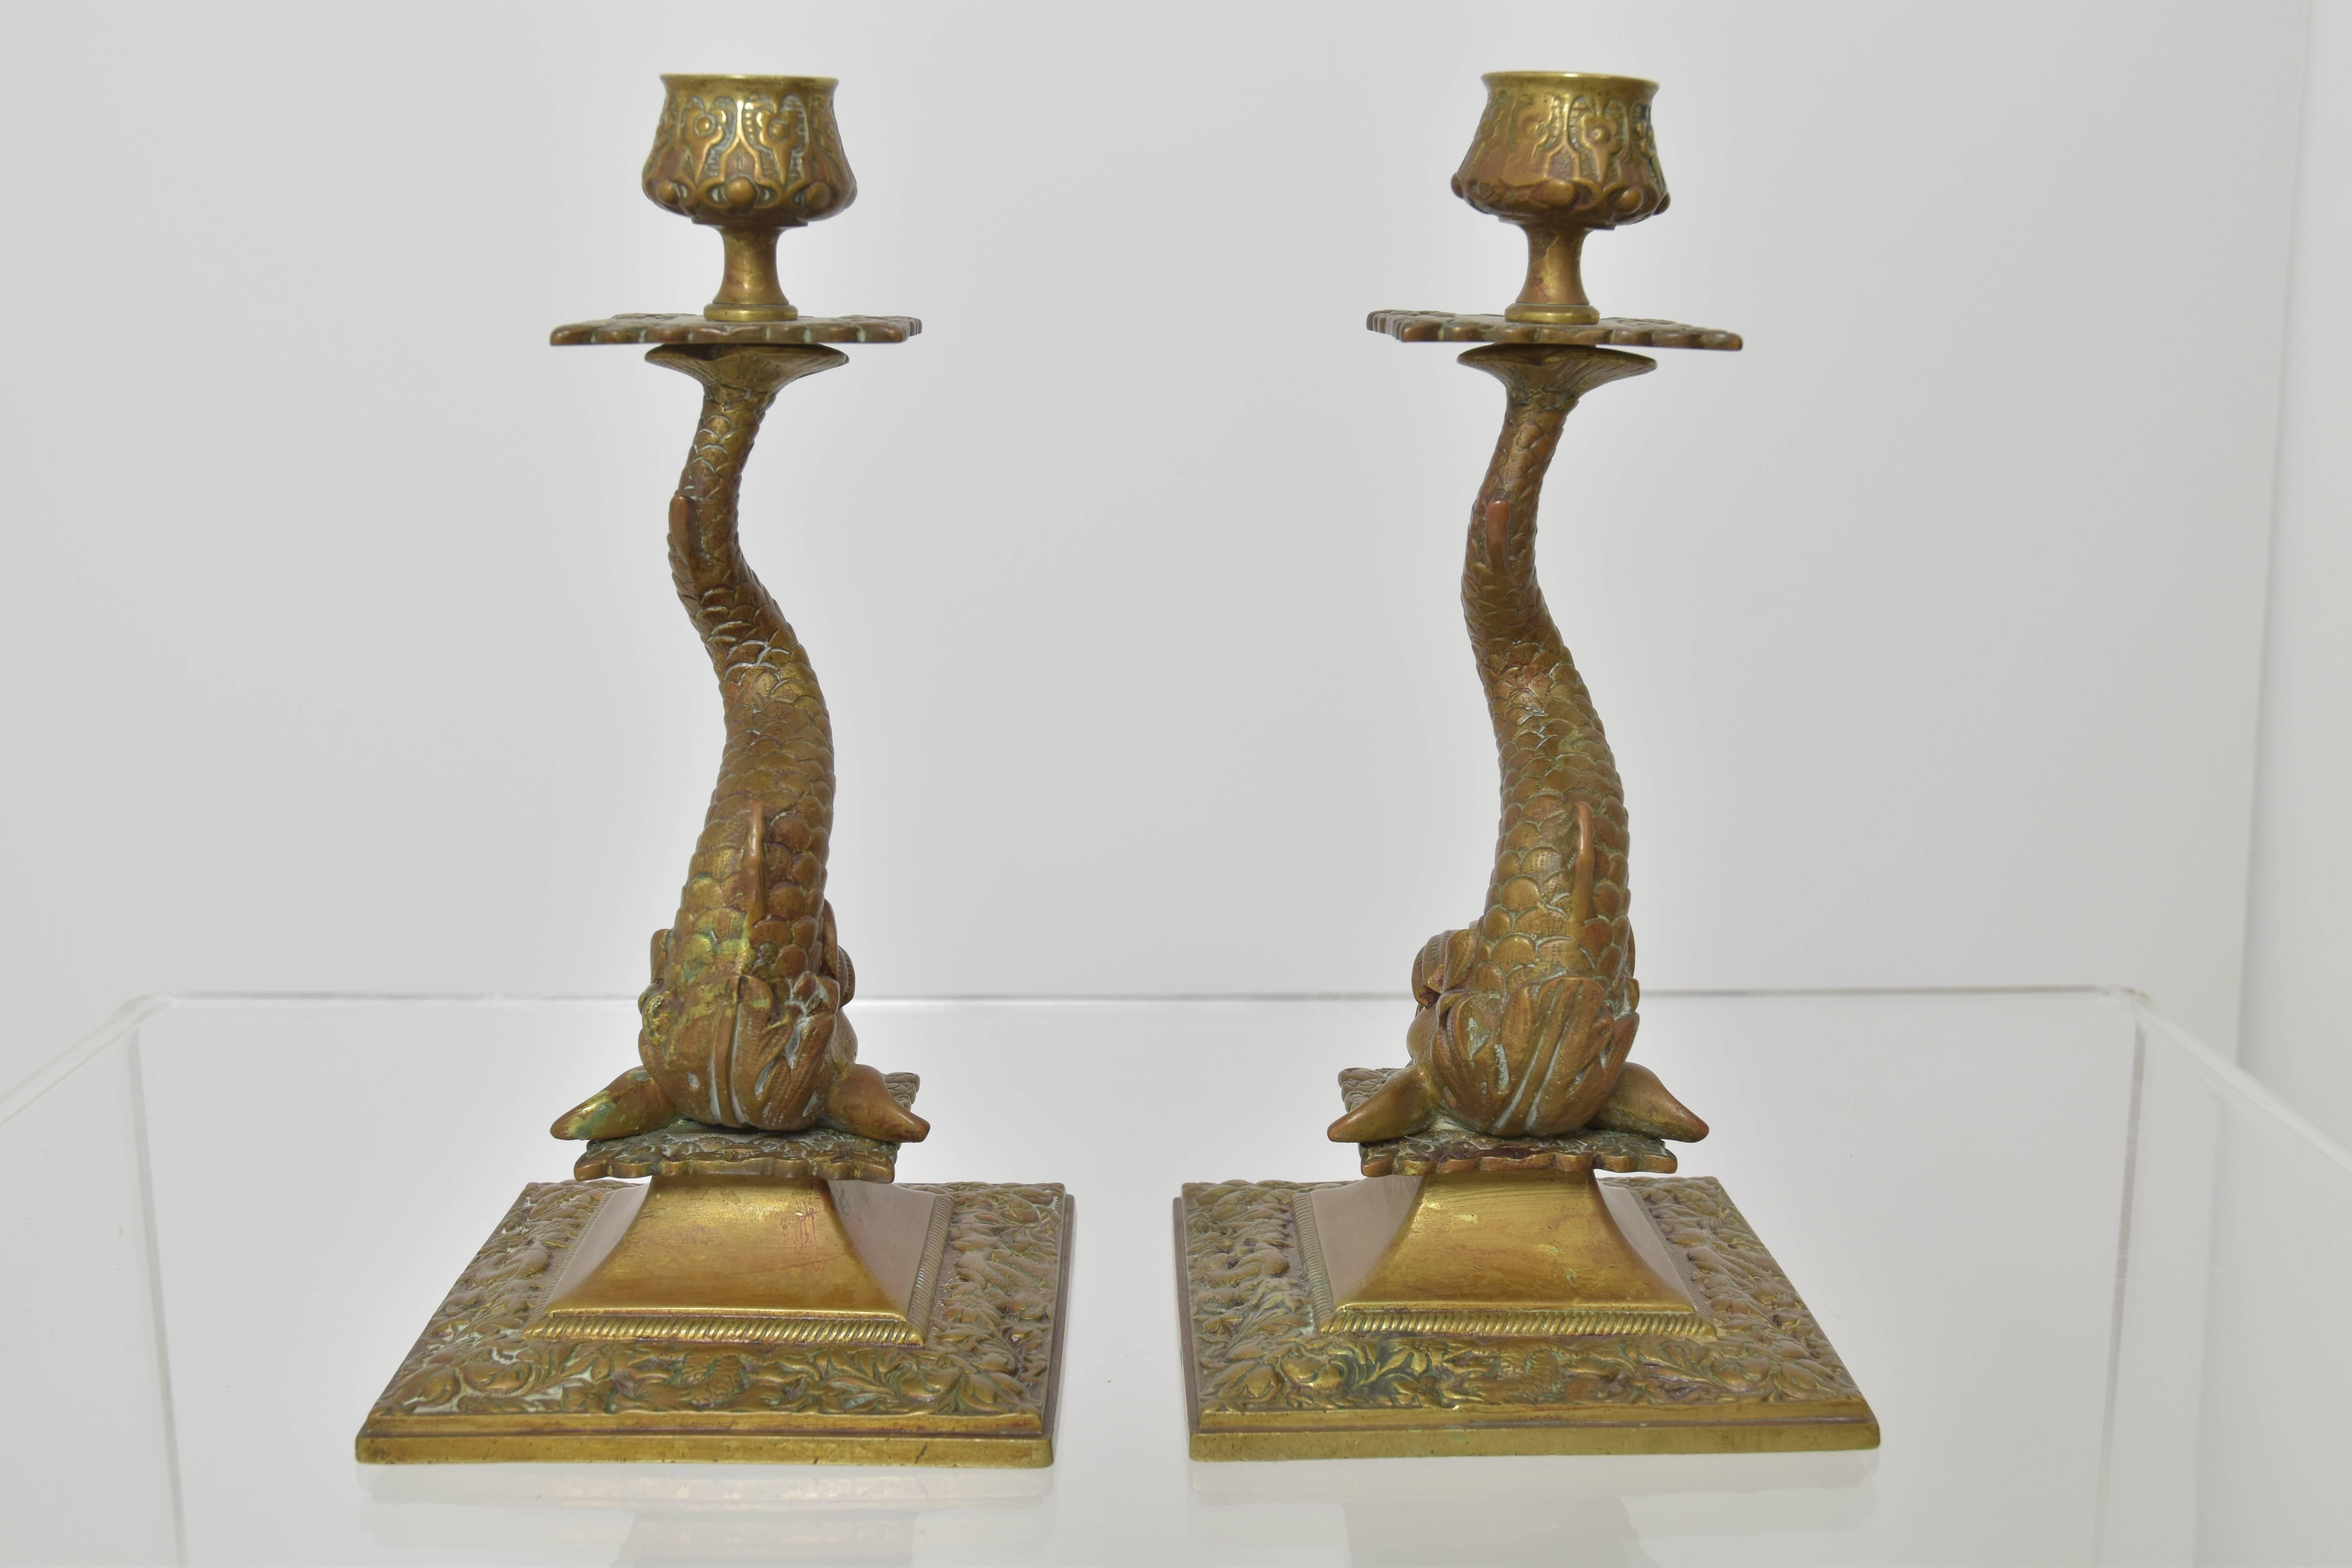 A charming and fantastic pair of cast bronze dolphin candlesticks with amazing floral, foliage and leaf details along the base. The large dolphins with upturned tails support the candleholders of each. These candlesticks are the perfect balance of